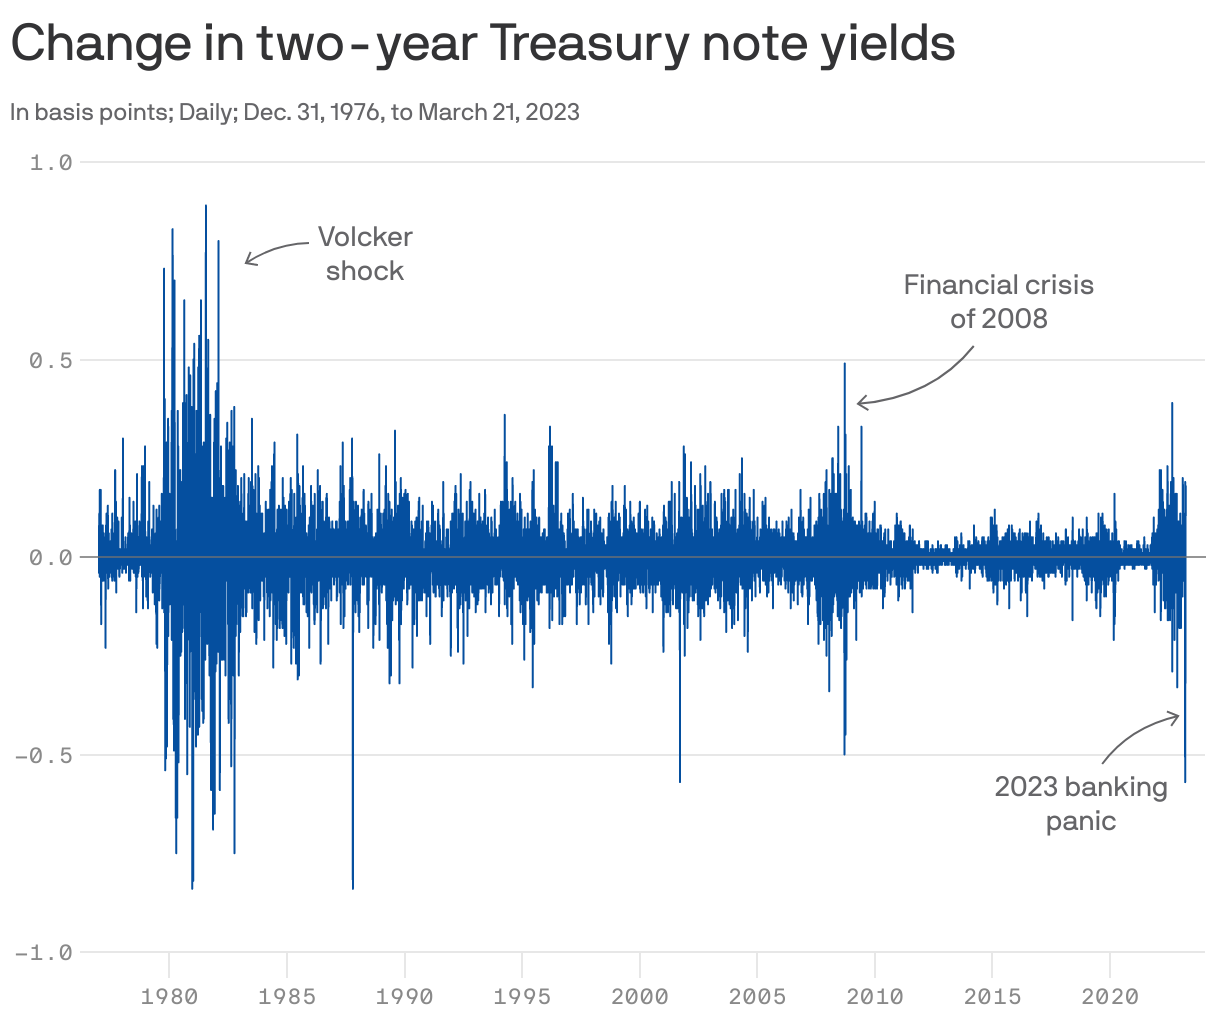 Change in two-year Treasury note yields